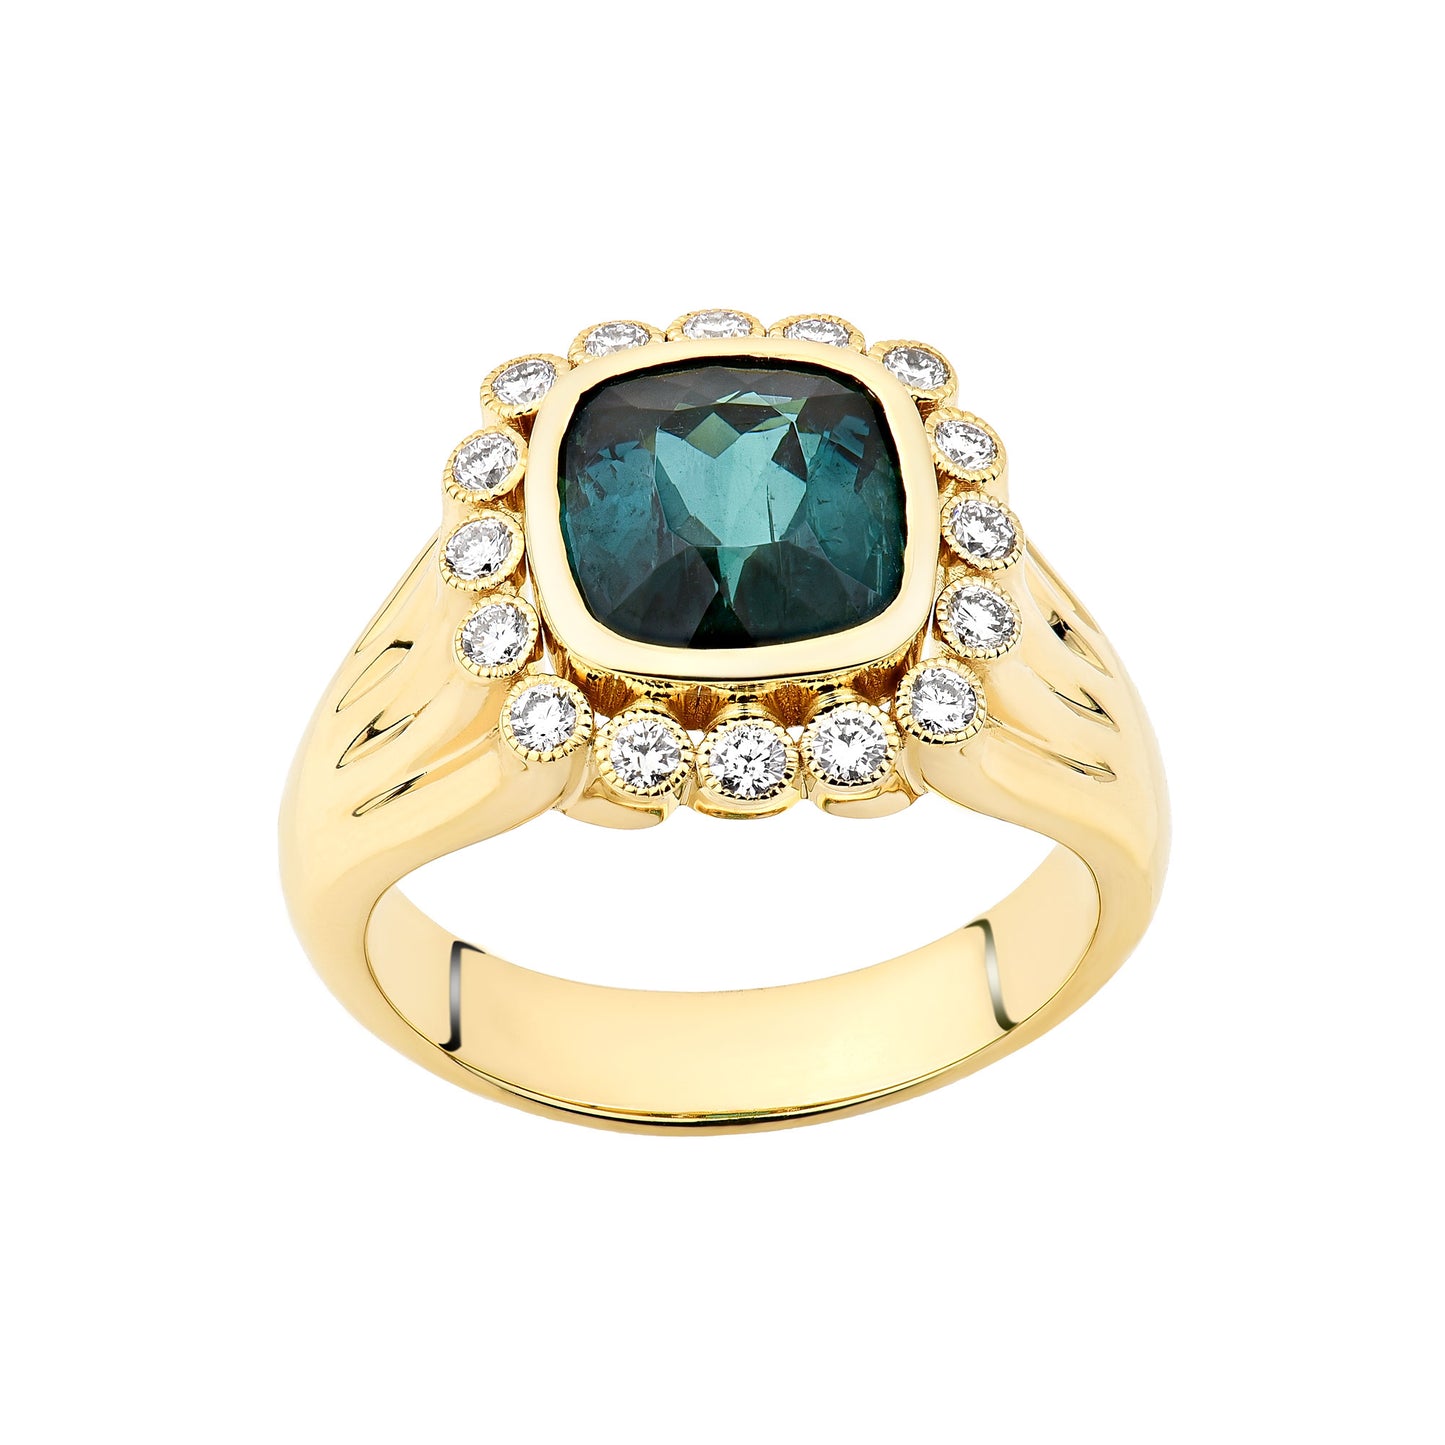 14K Yellow Gold Blue Topaz Cushion Cut Signet Ring With Diamond Accents